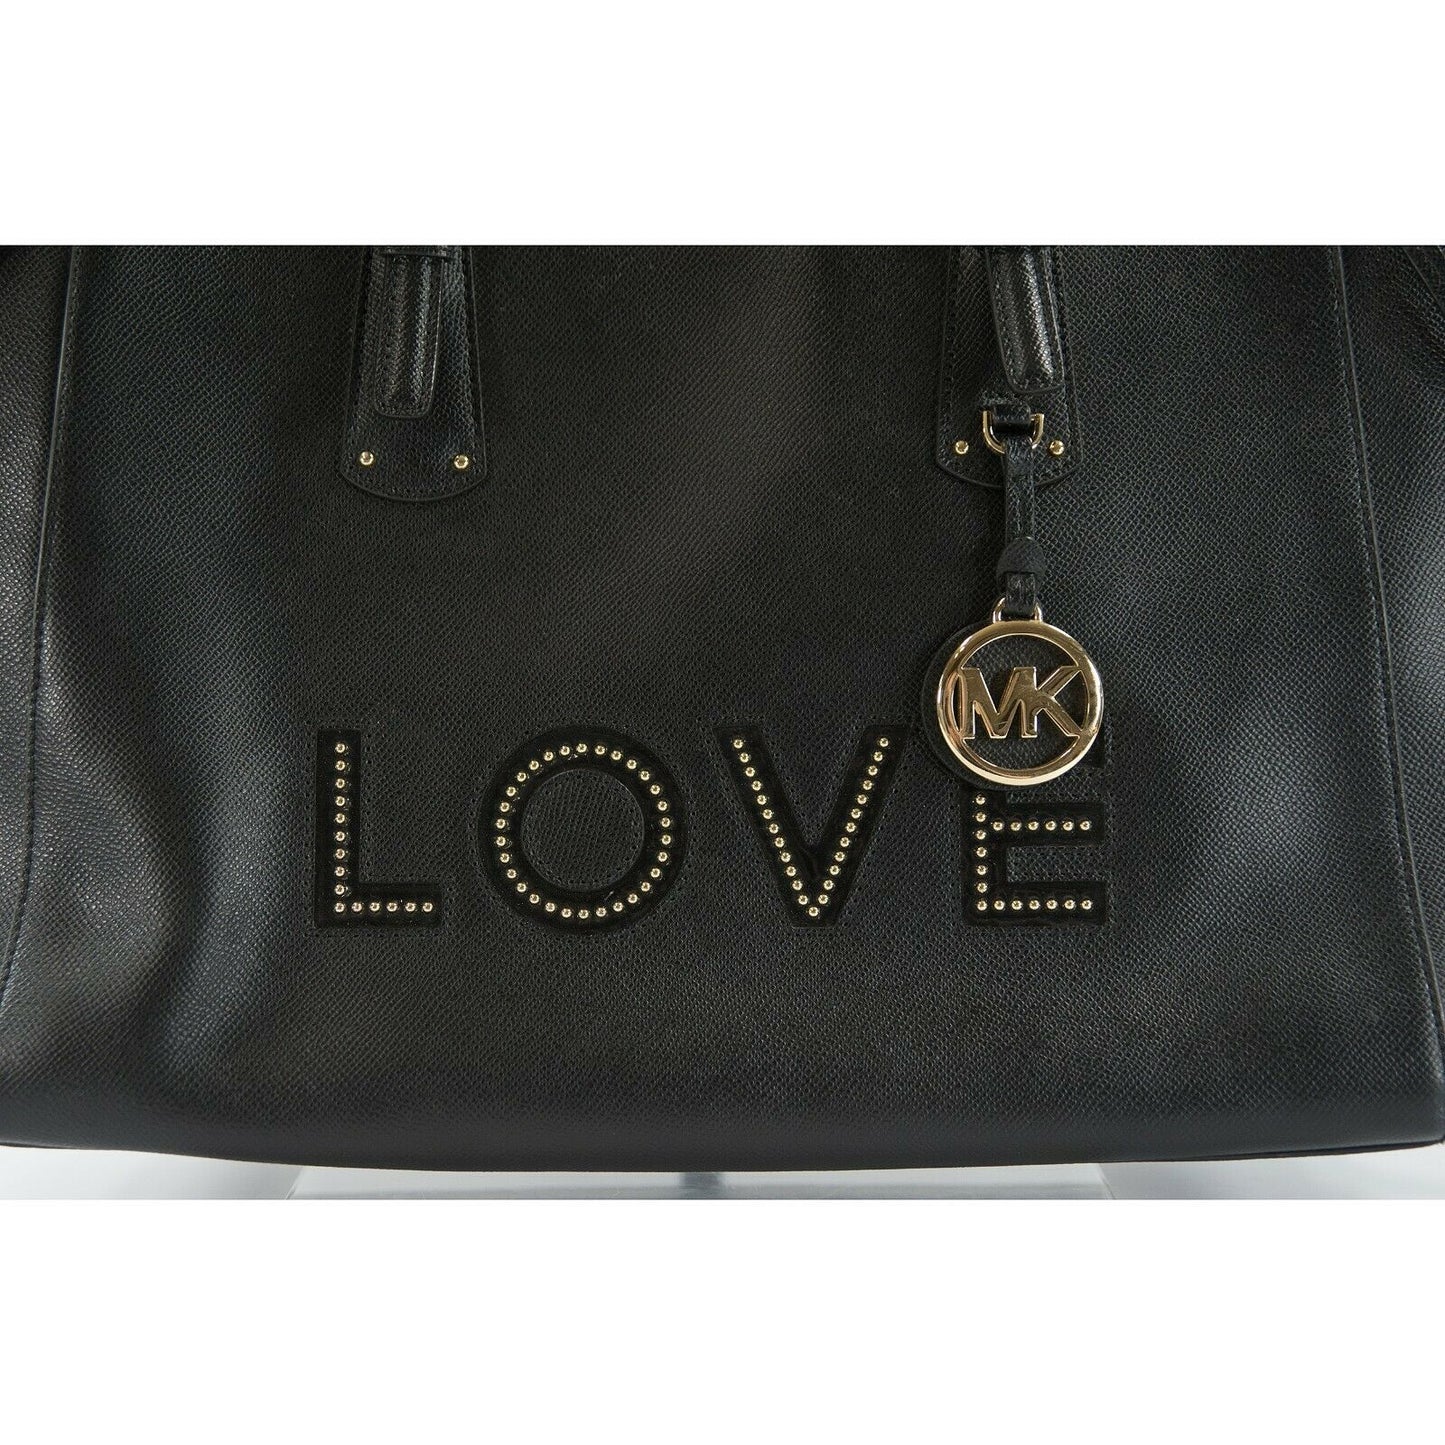 Michael Kors Love Studded Black Leather Large Voyager Top Zip Tote Bag NWT